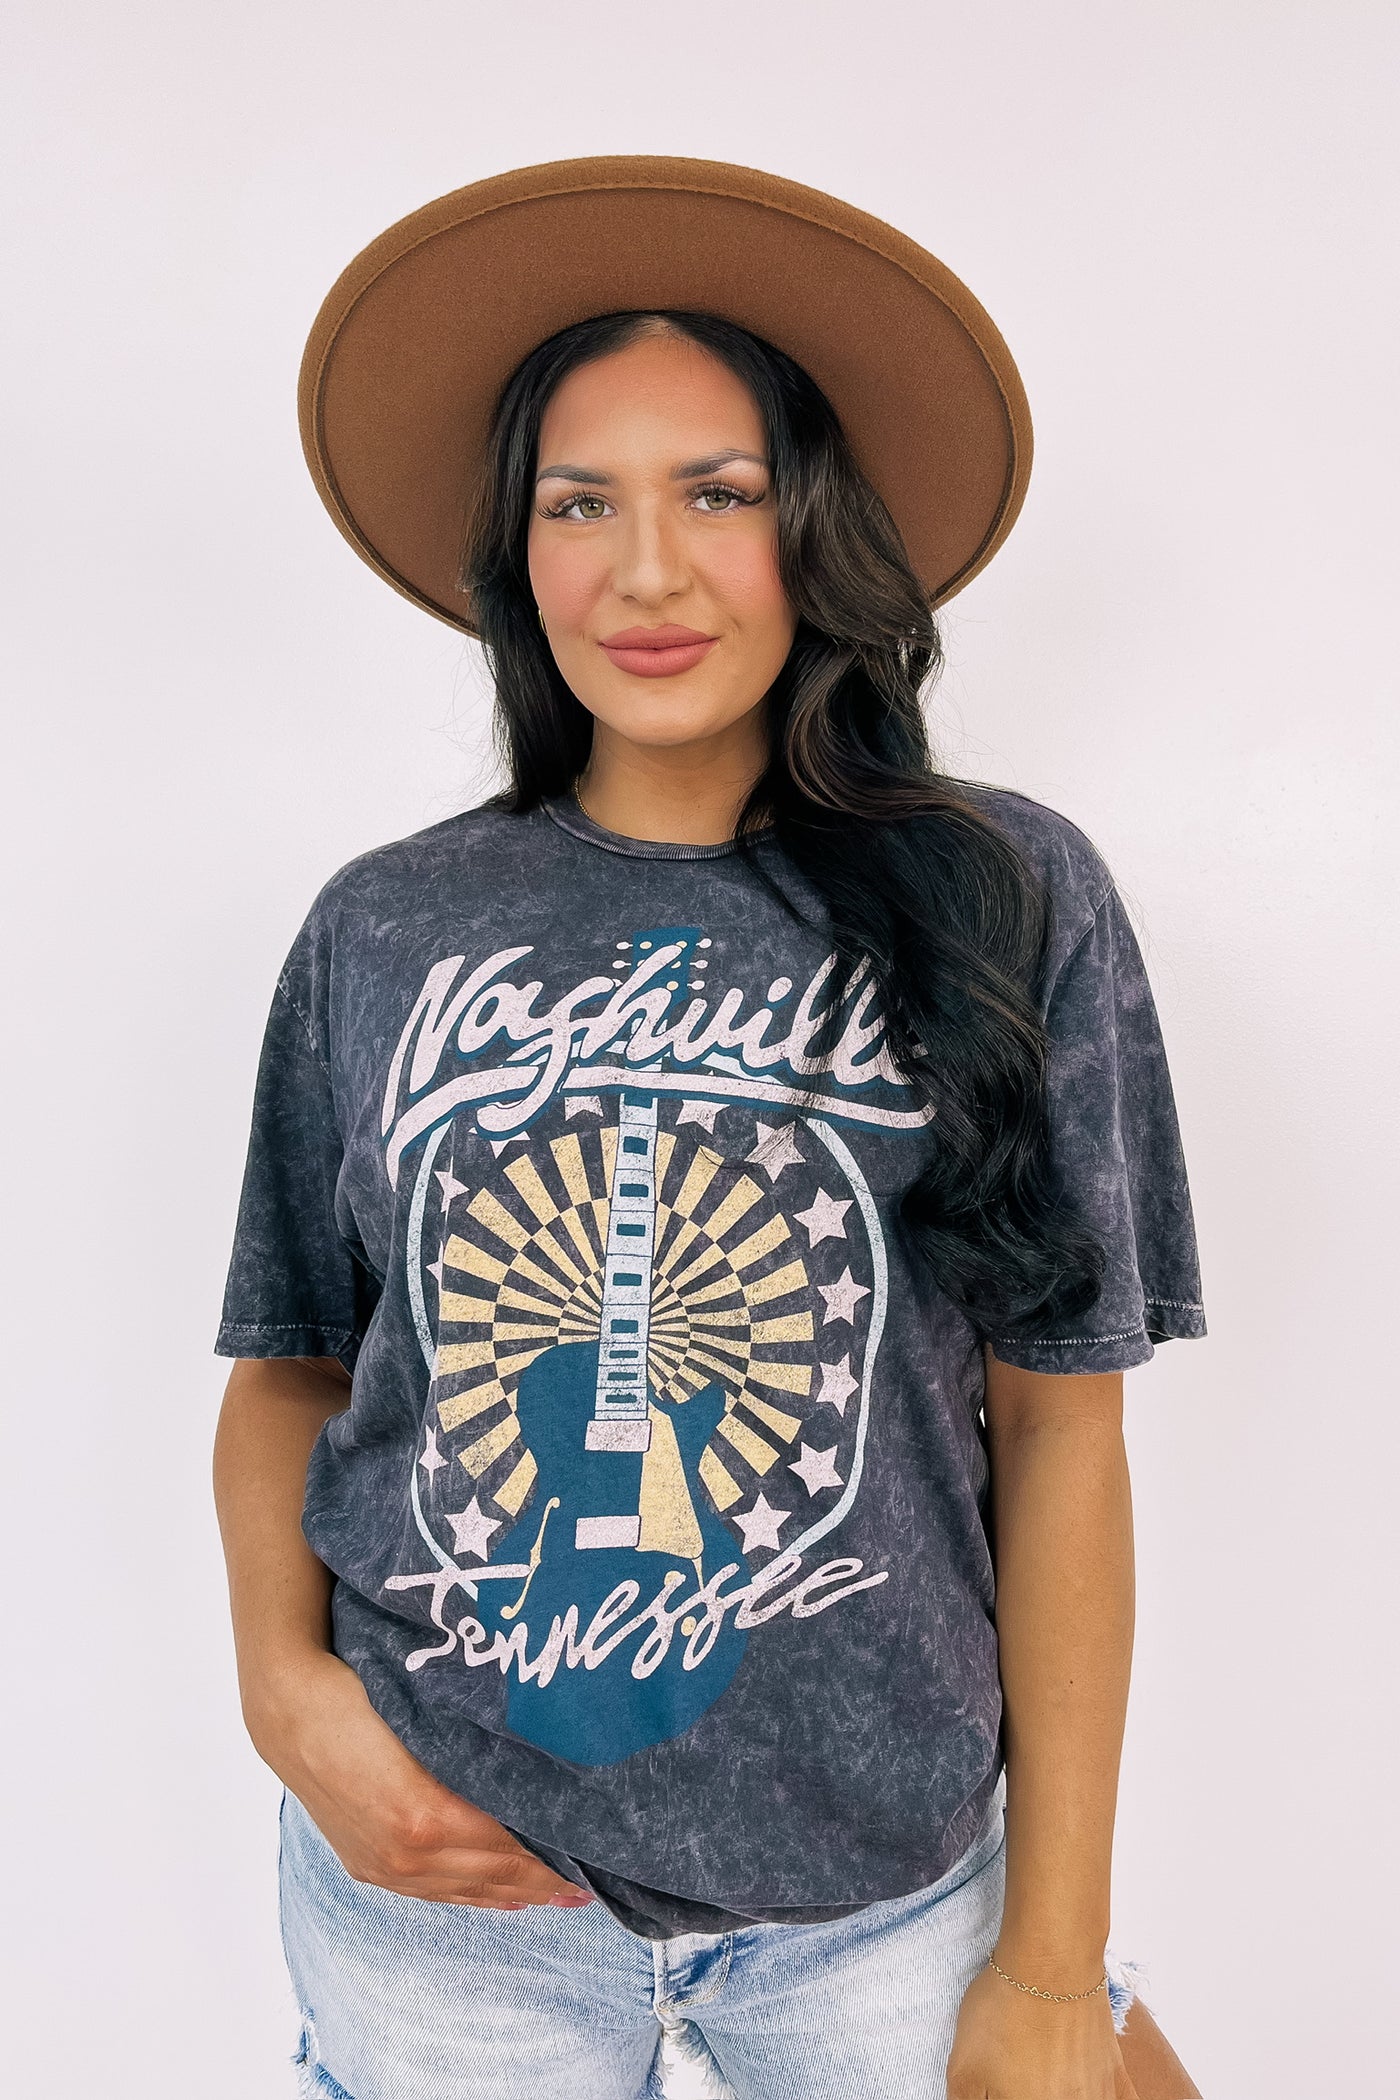 Nashville Tennessee Graphic Top